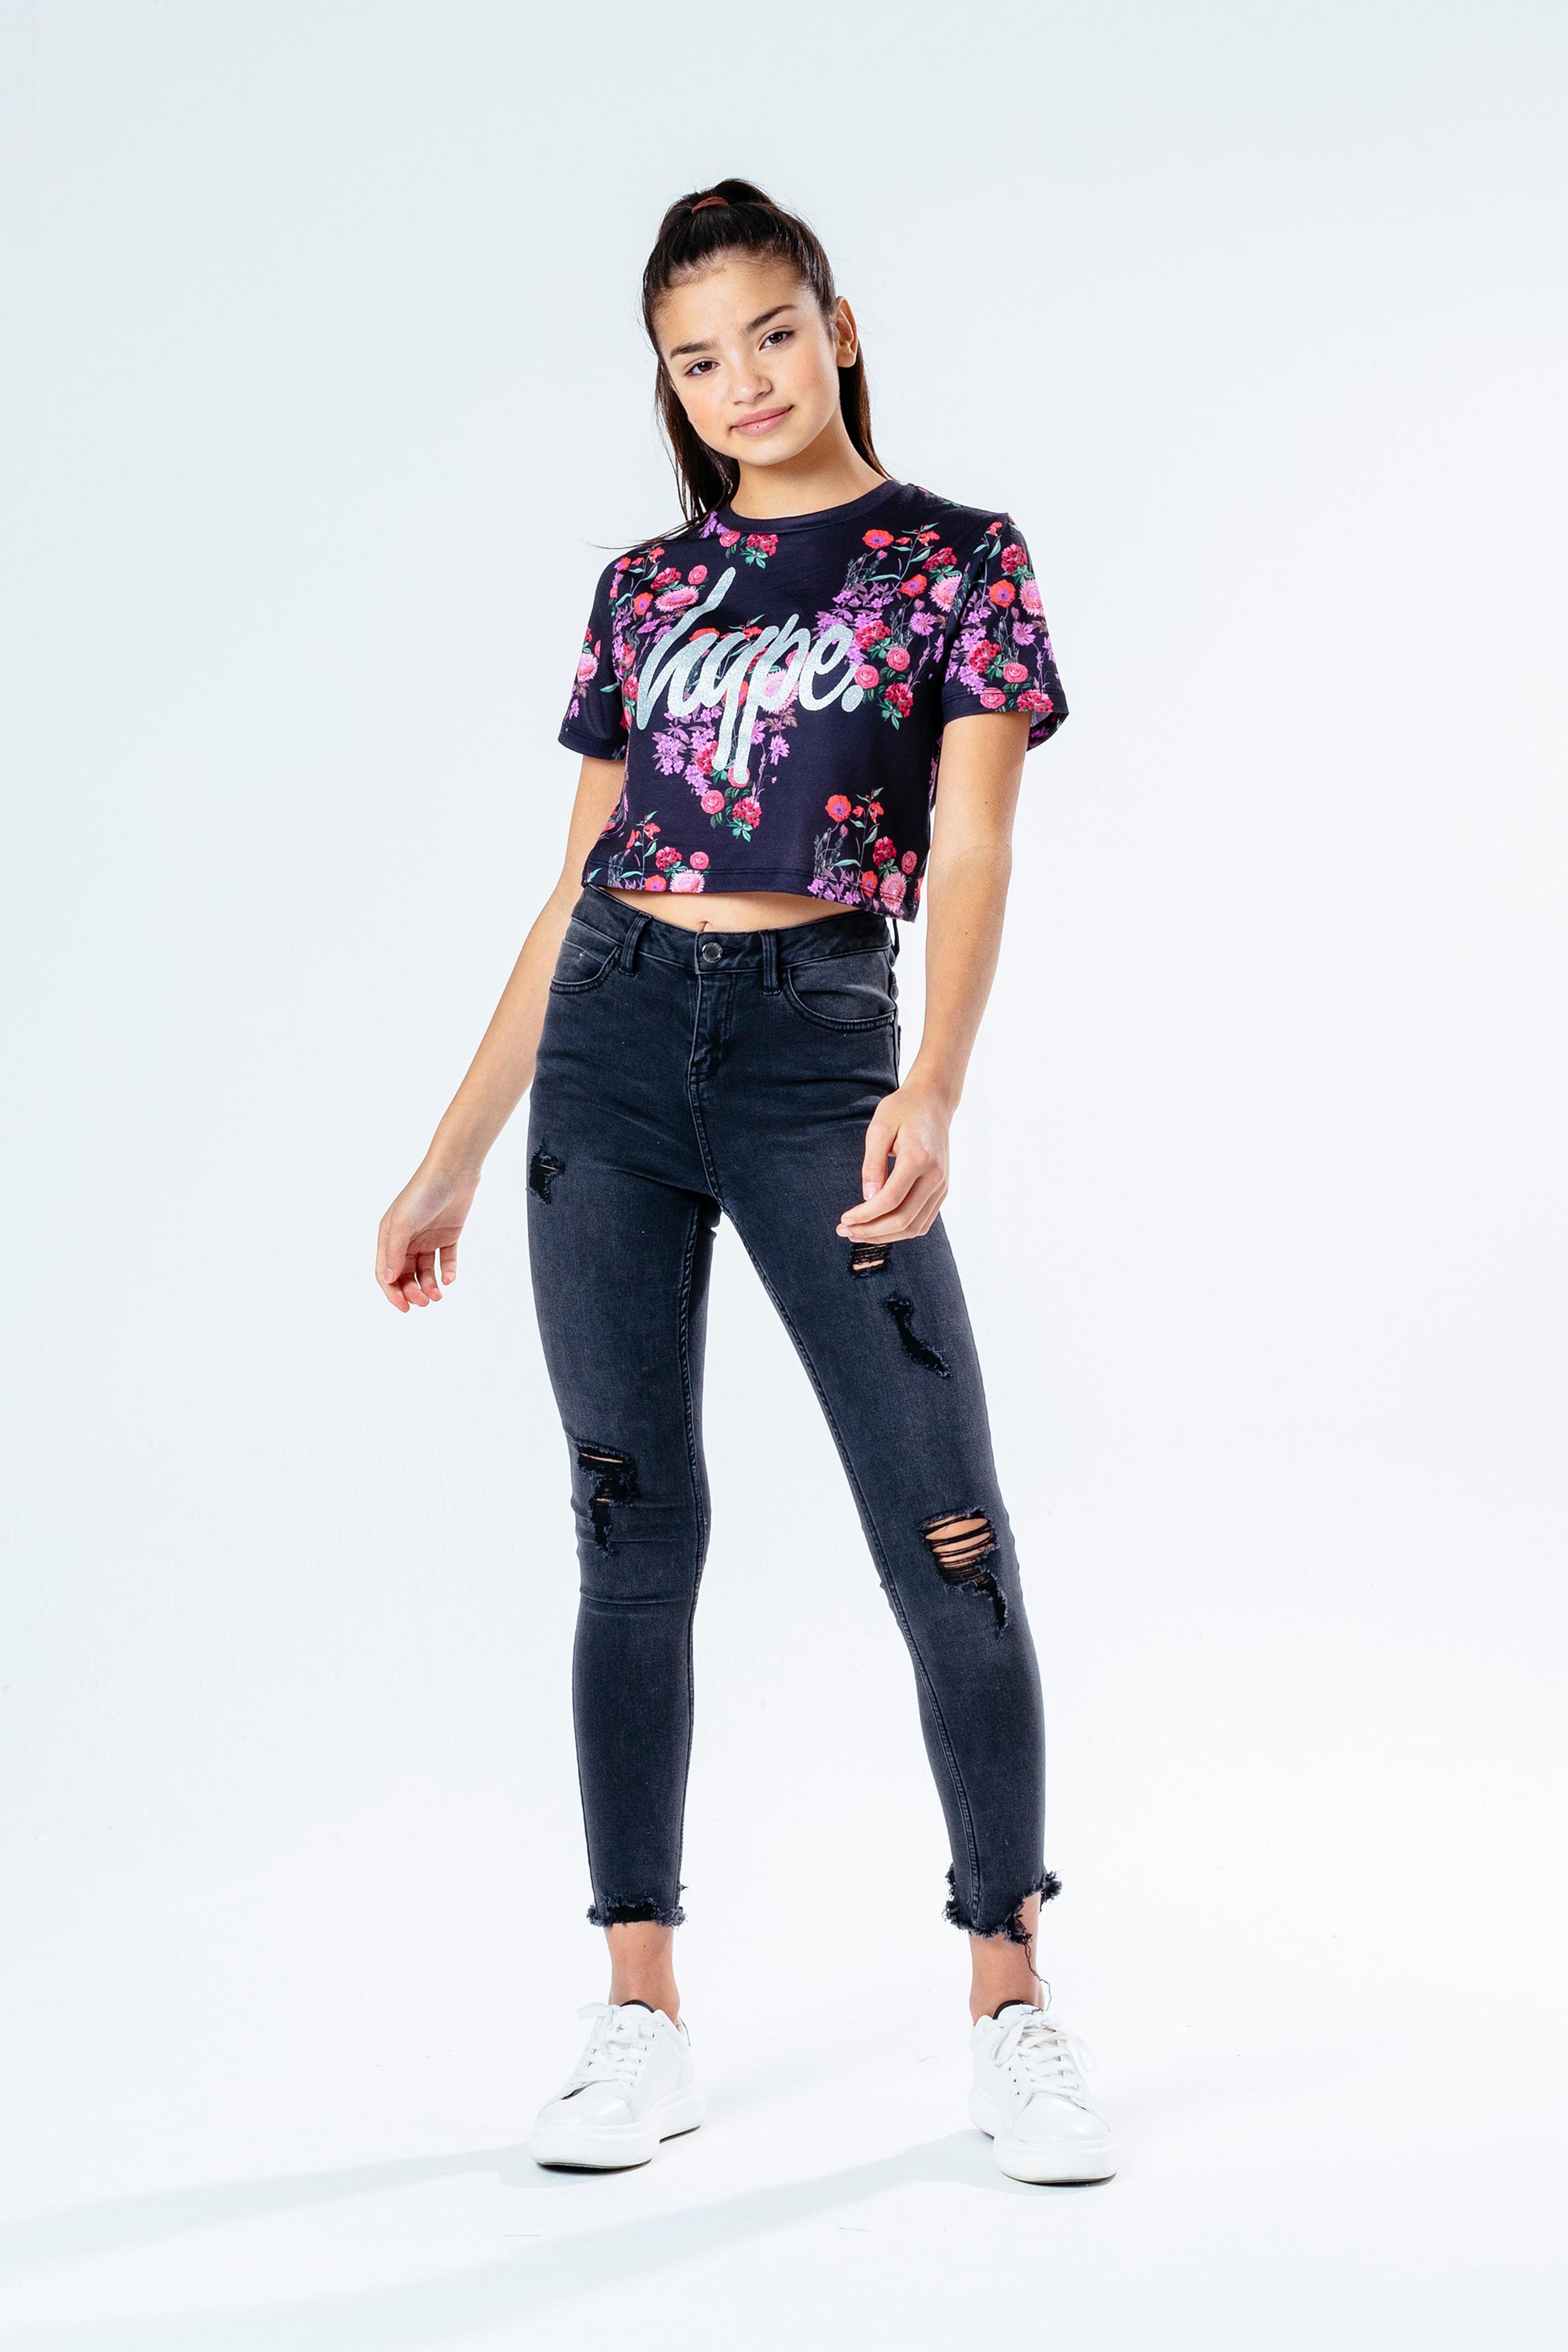 Alternate View 2 of HYPE DITSY FLORAL GIRLS CROP T-SHIRT